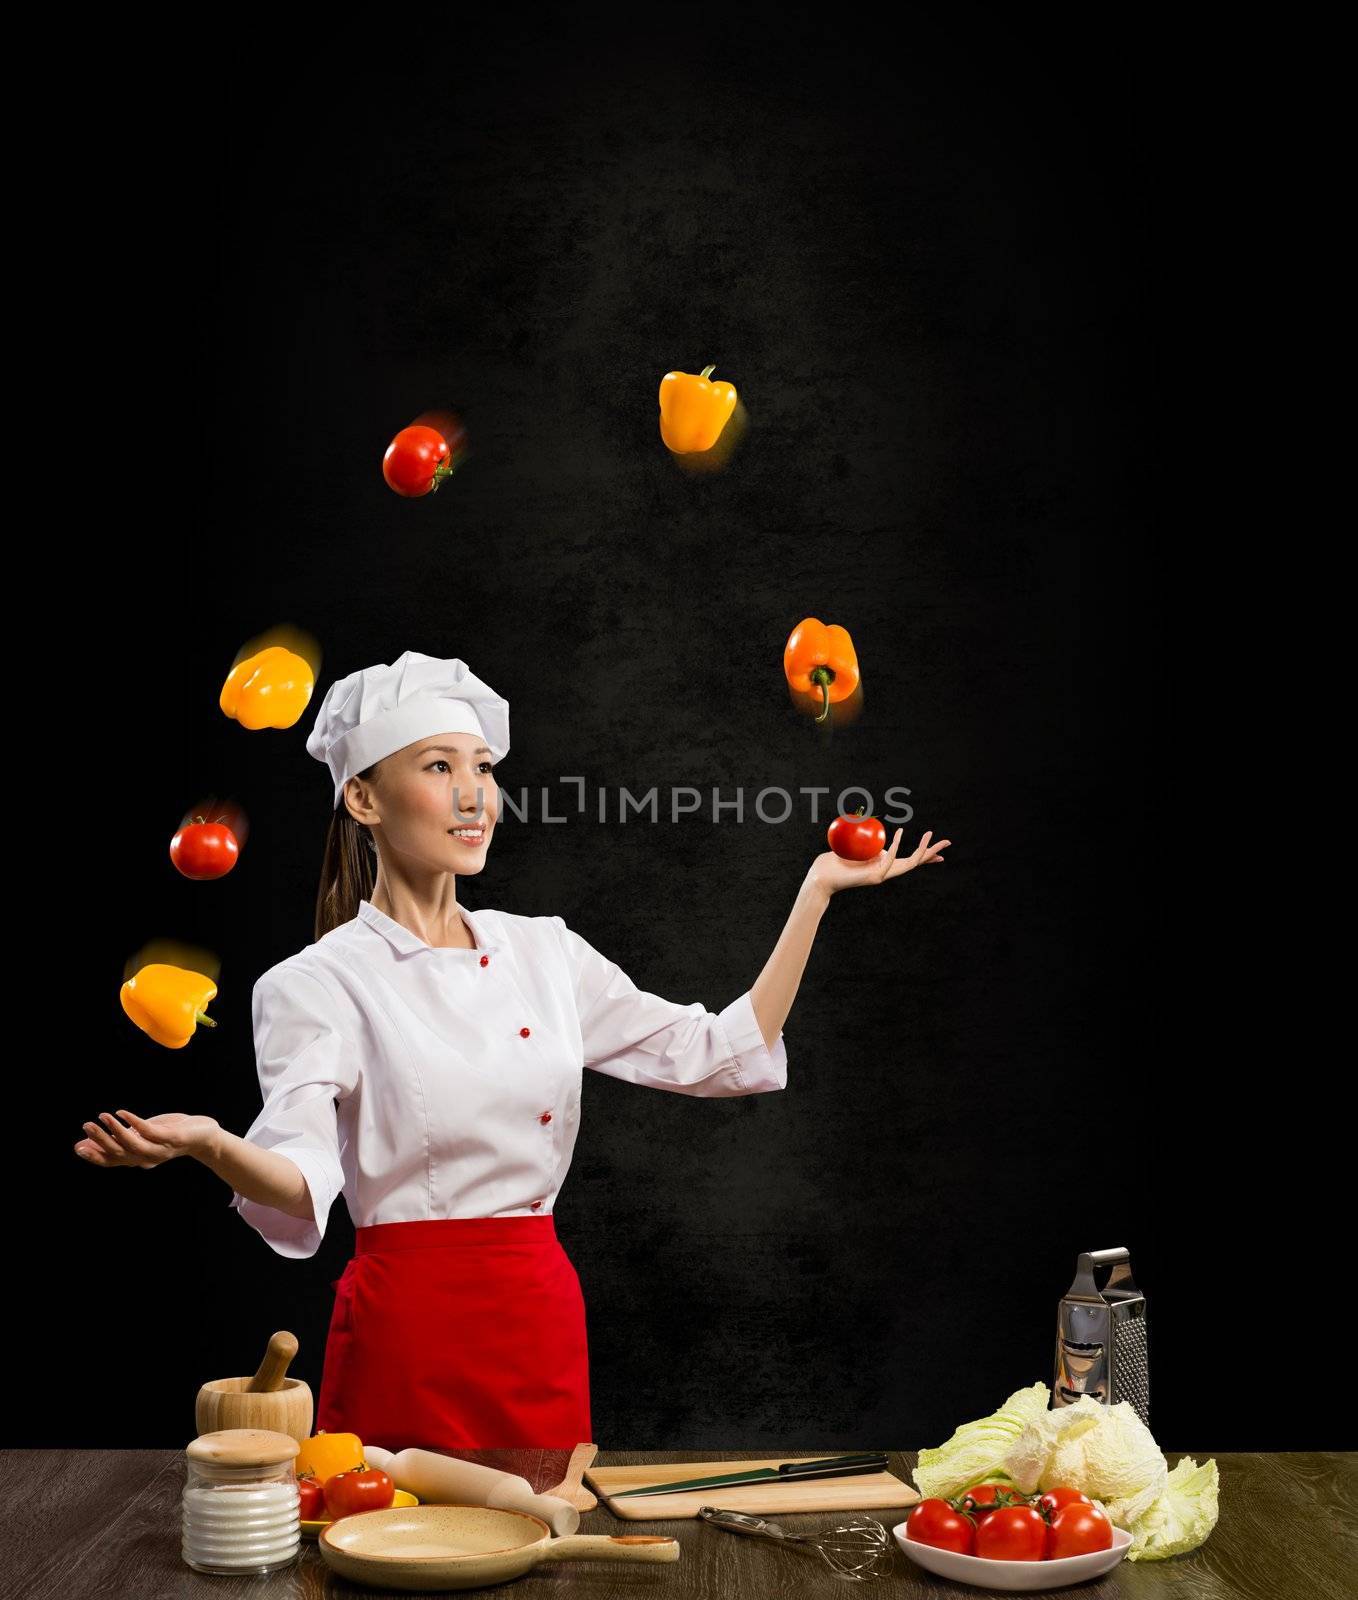 Asian woman chef juggling with vegetables by adam121